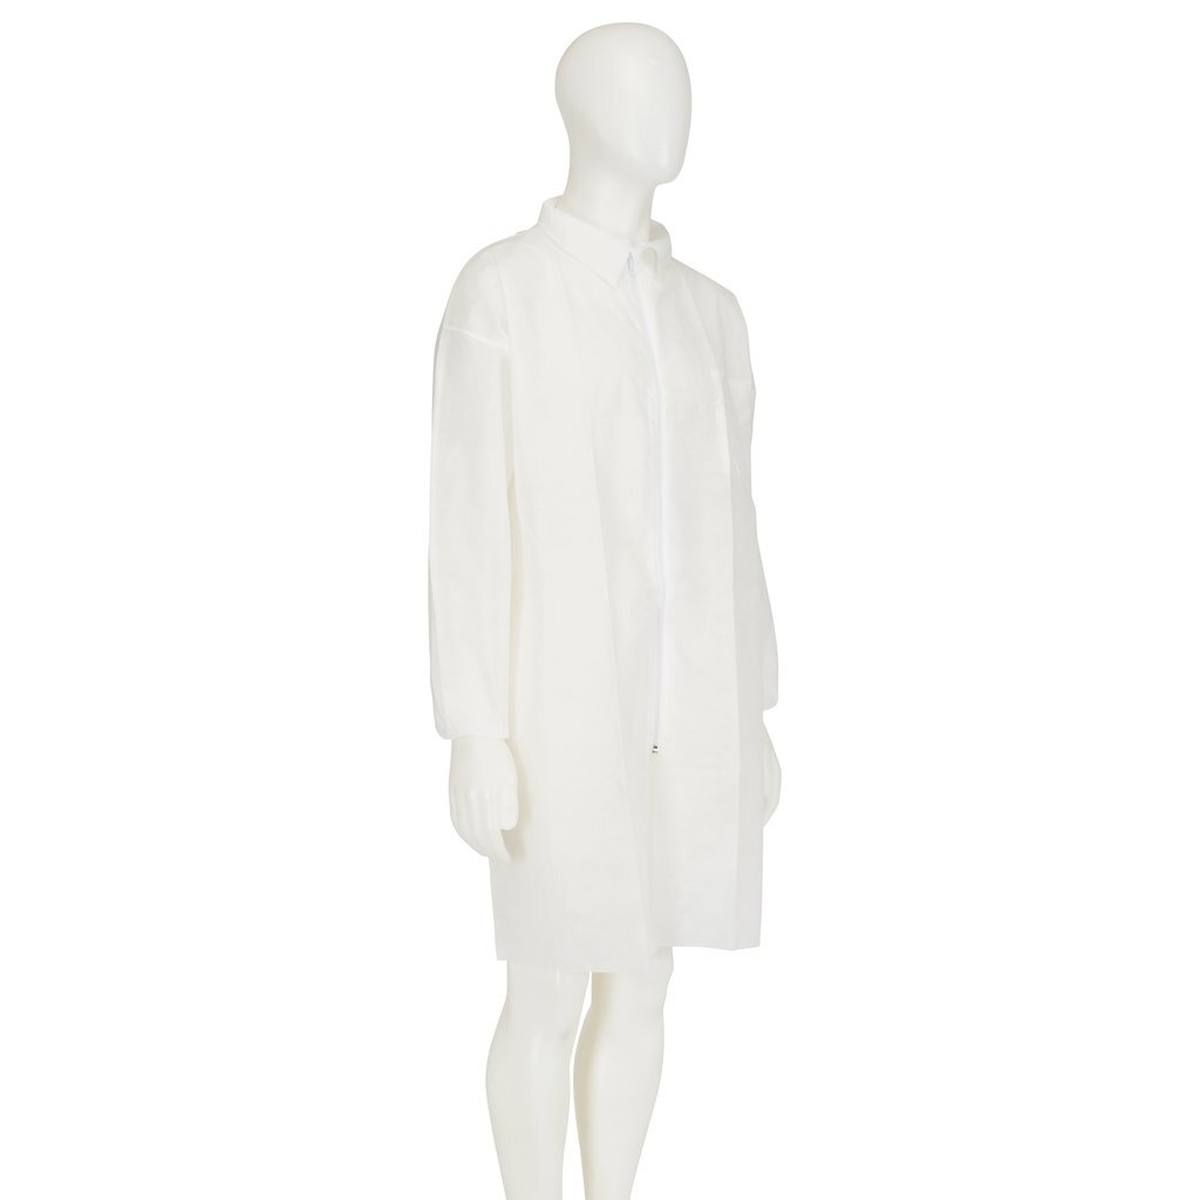 3M 4400 Coat, white, size S, material 100% polypropylene, breathable, very light, with zip fastener